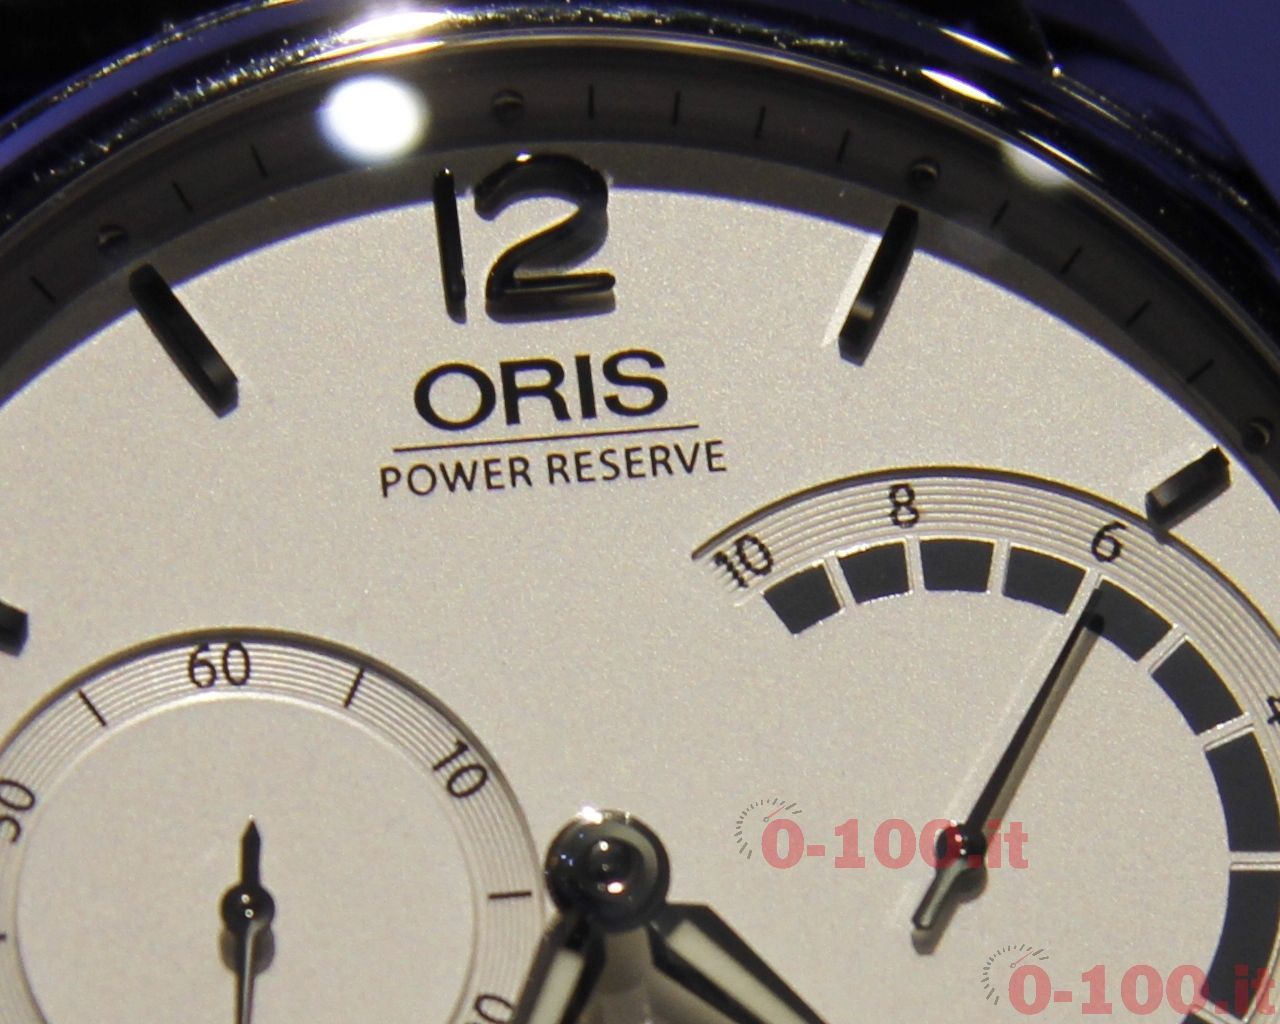 baselworld-2014-Oris 110 Years Limited Edition_0-1009